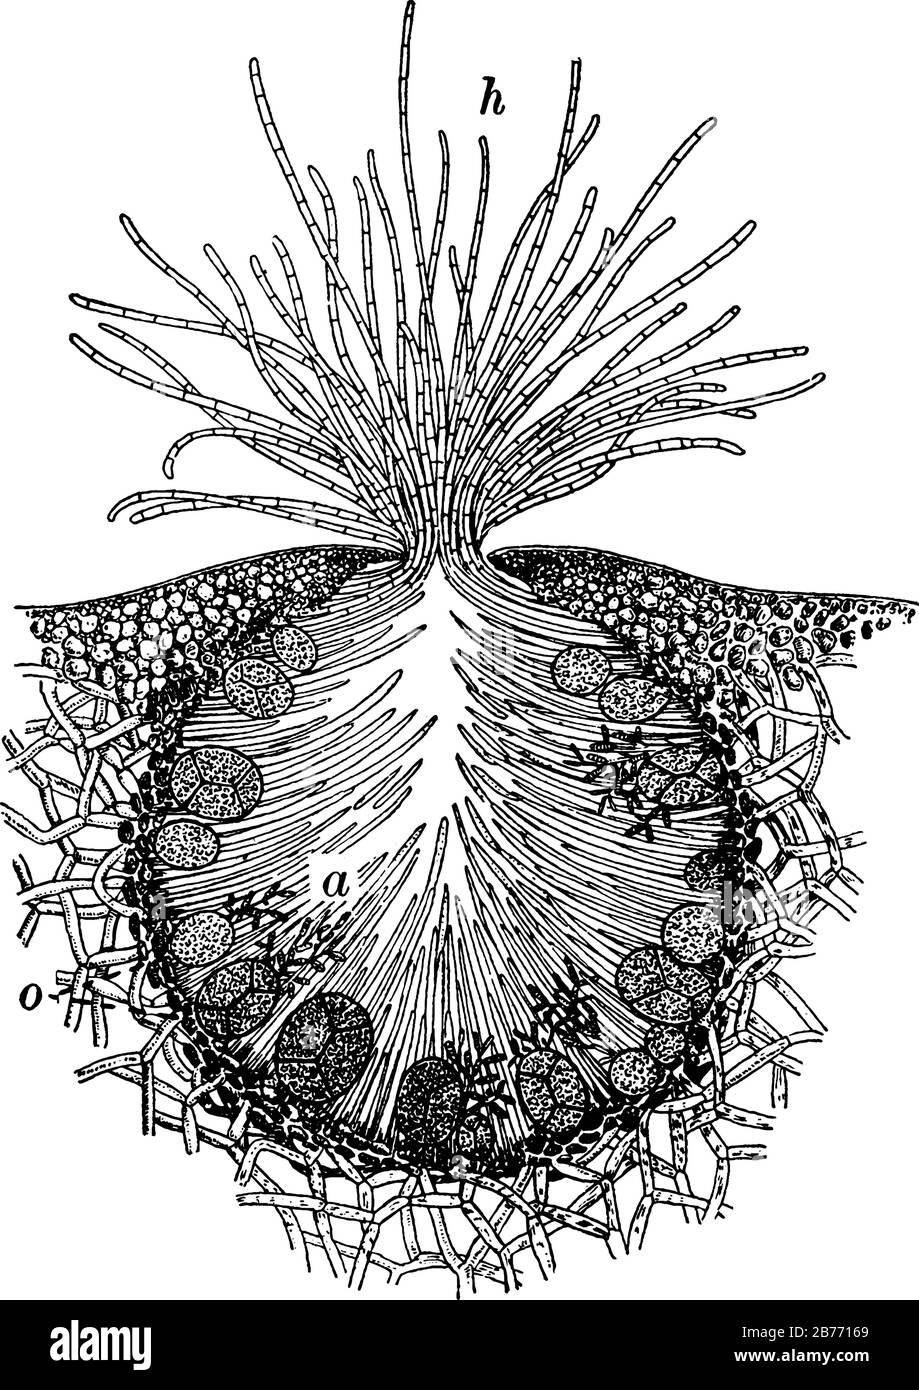 A typical representation of the transverse section of conceptacle of a rockweed (Fucus platycarpus), parts, h, hairs; a, antheridia; o, oogonia, vinta Stock Vector